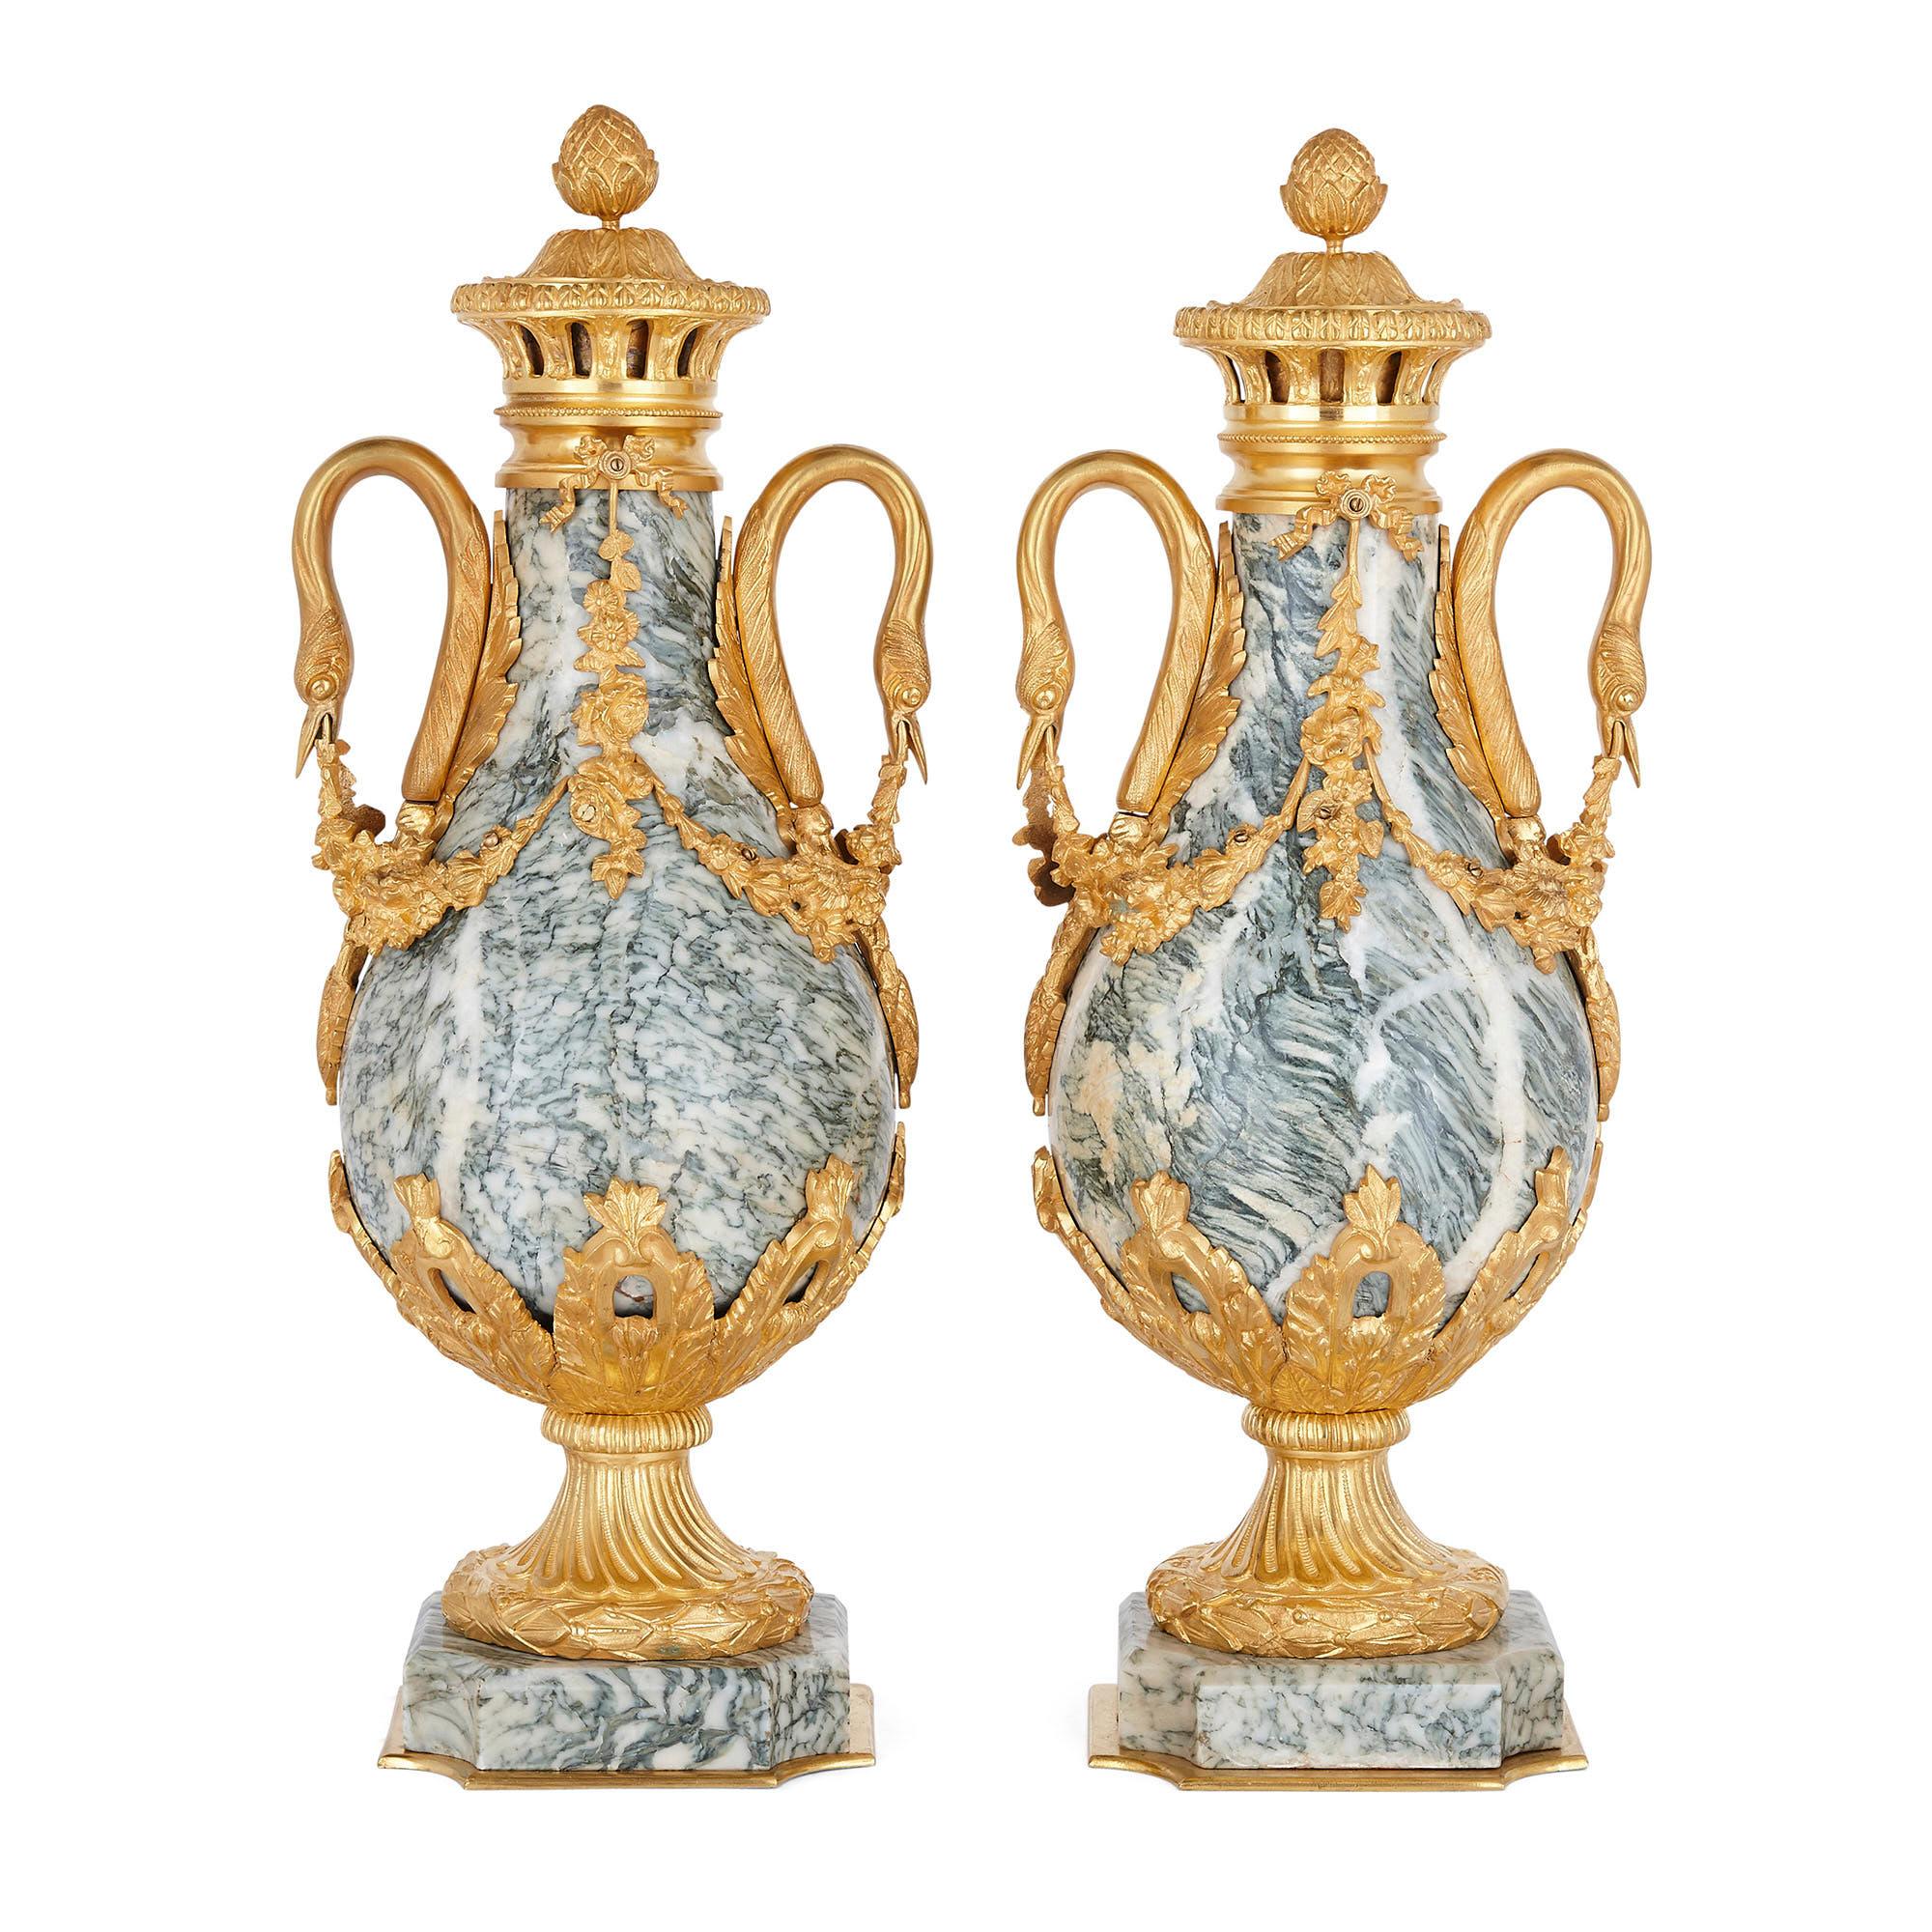 Pair of neoclassical style gilt bronze and marble vases
French, early 20th century
Measures: Height 52cm, width 21cm, depth 19cm

Each vase in this pair, crafted from gilt bronze mounted grey marble, is baluster shaped in a manner characteristic